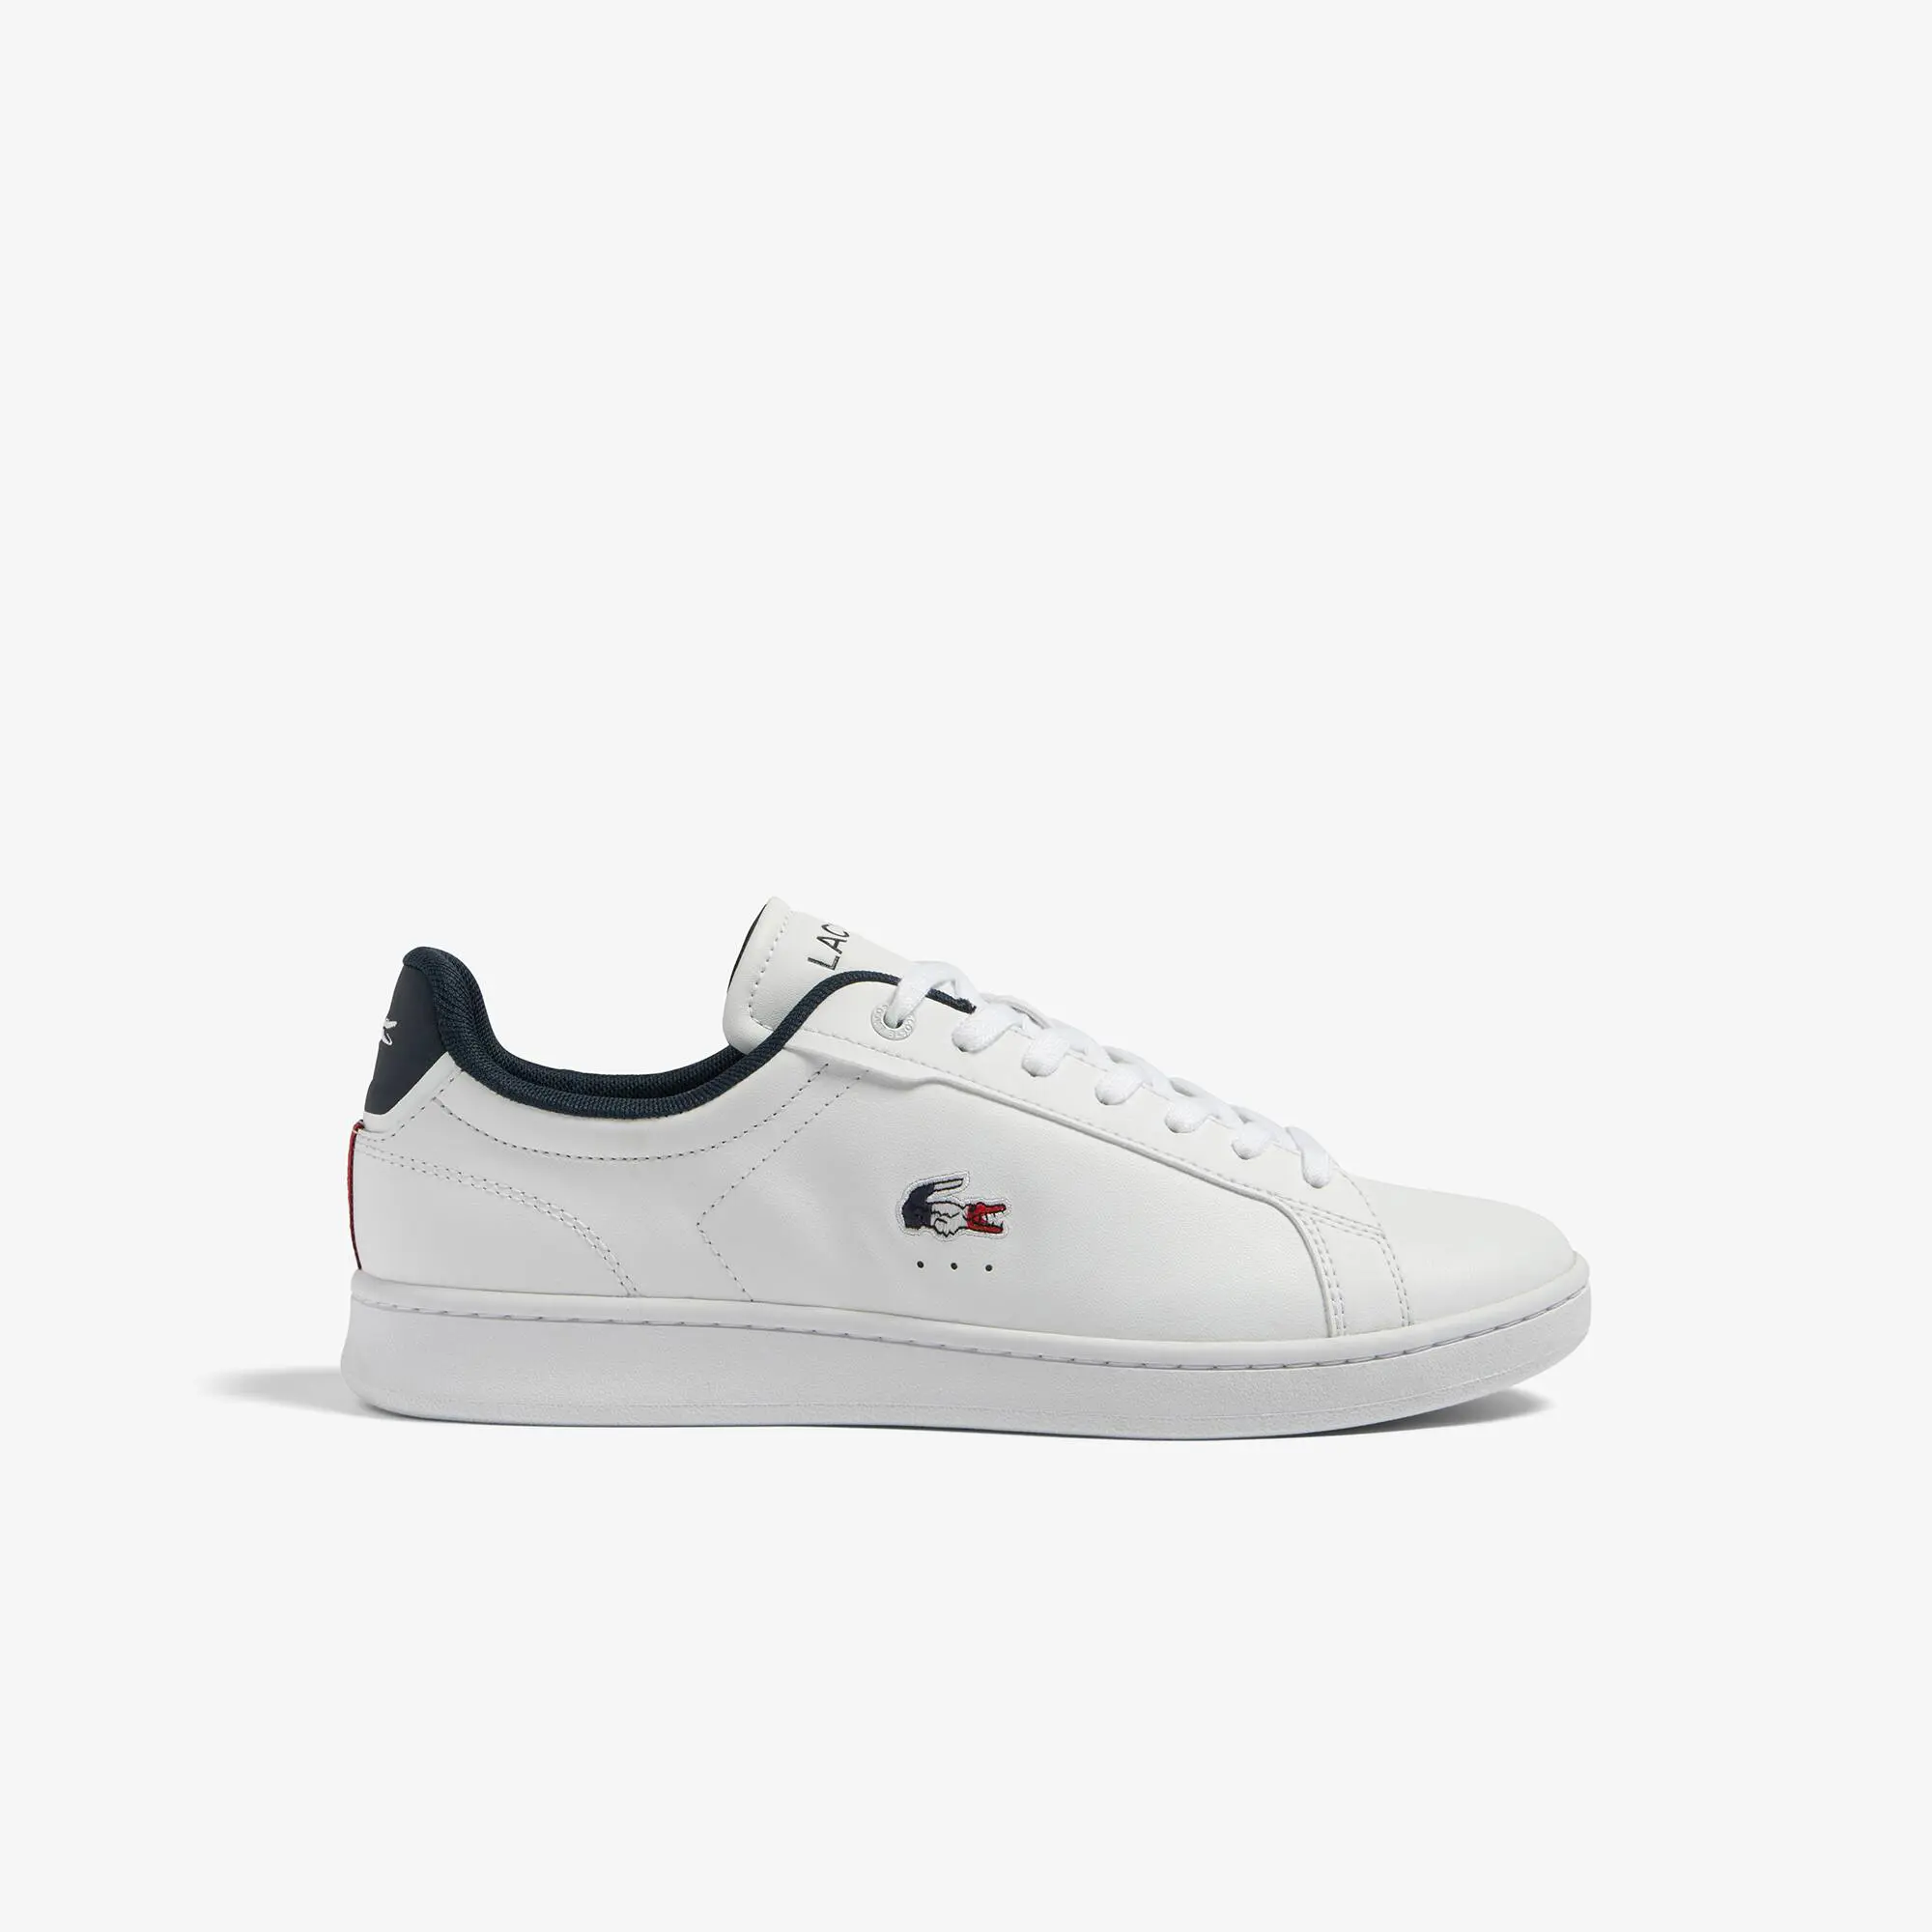 Lacoste Men's Lacoste Carnaby Pro Leather Tricolour Trainers. 1